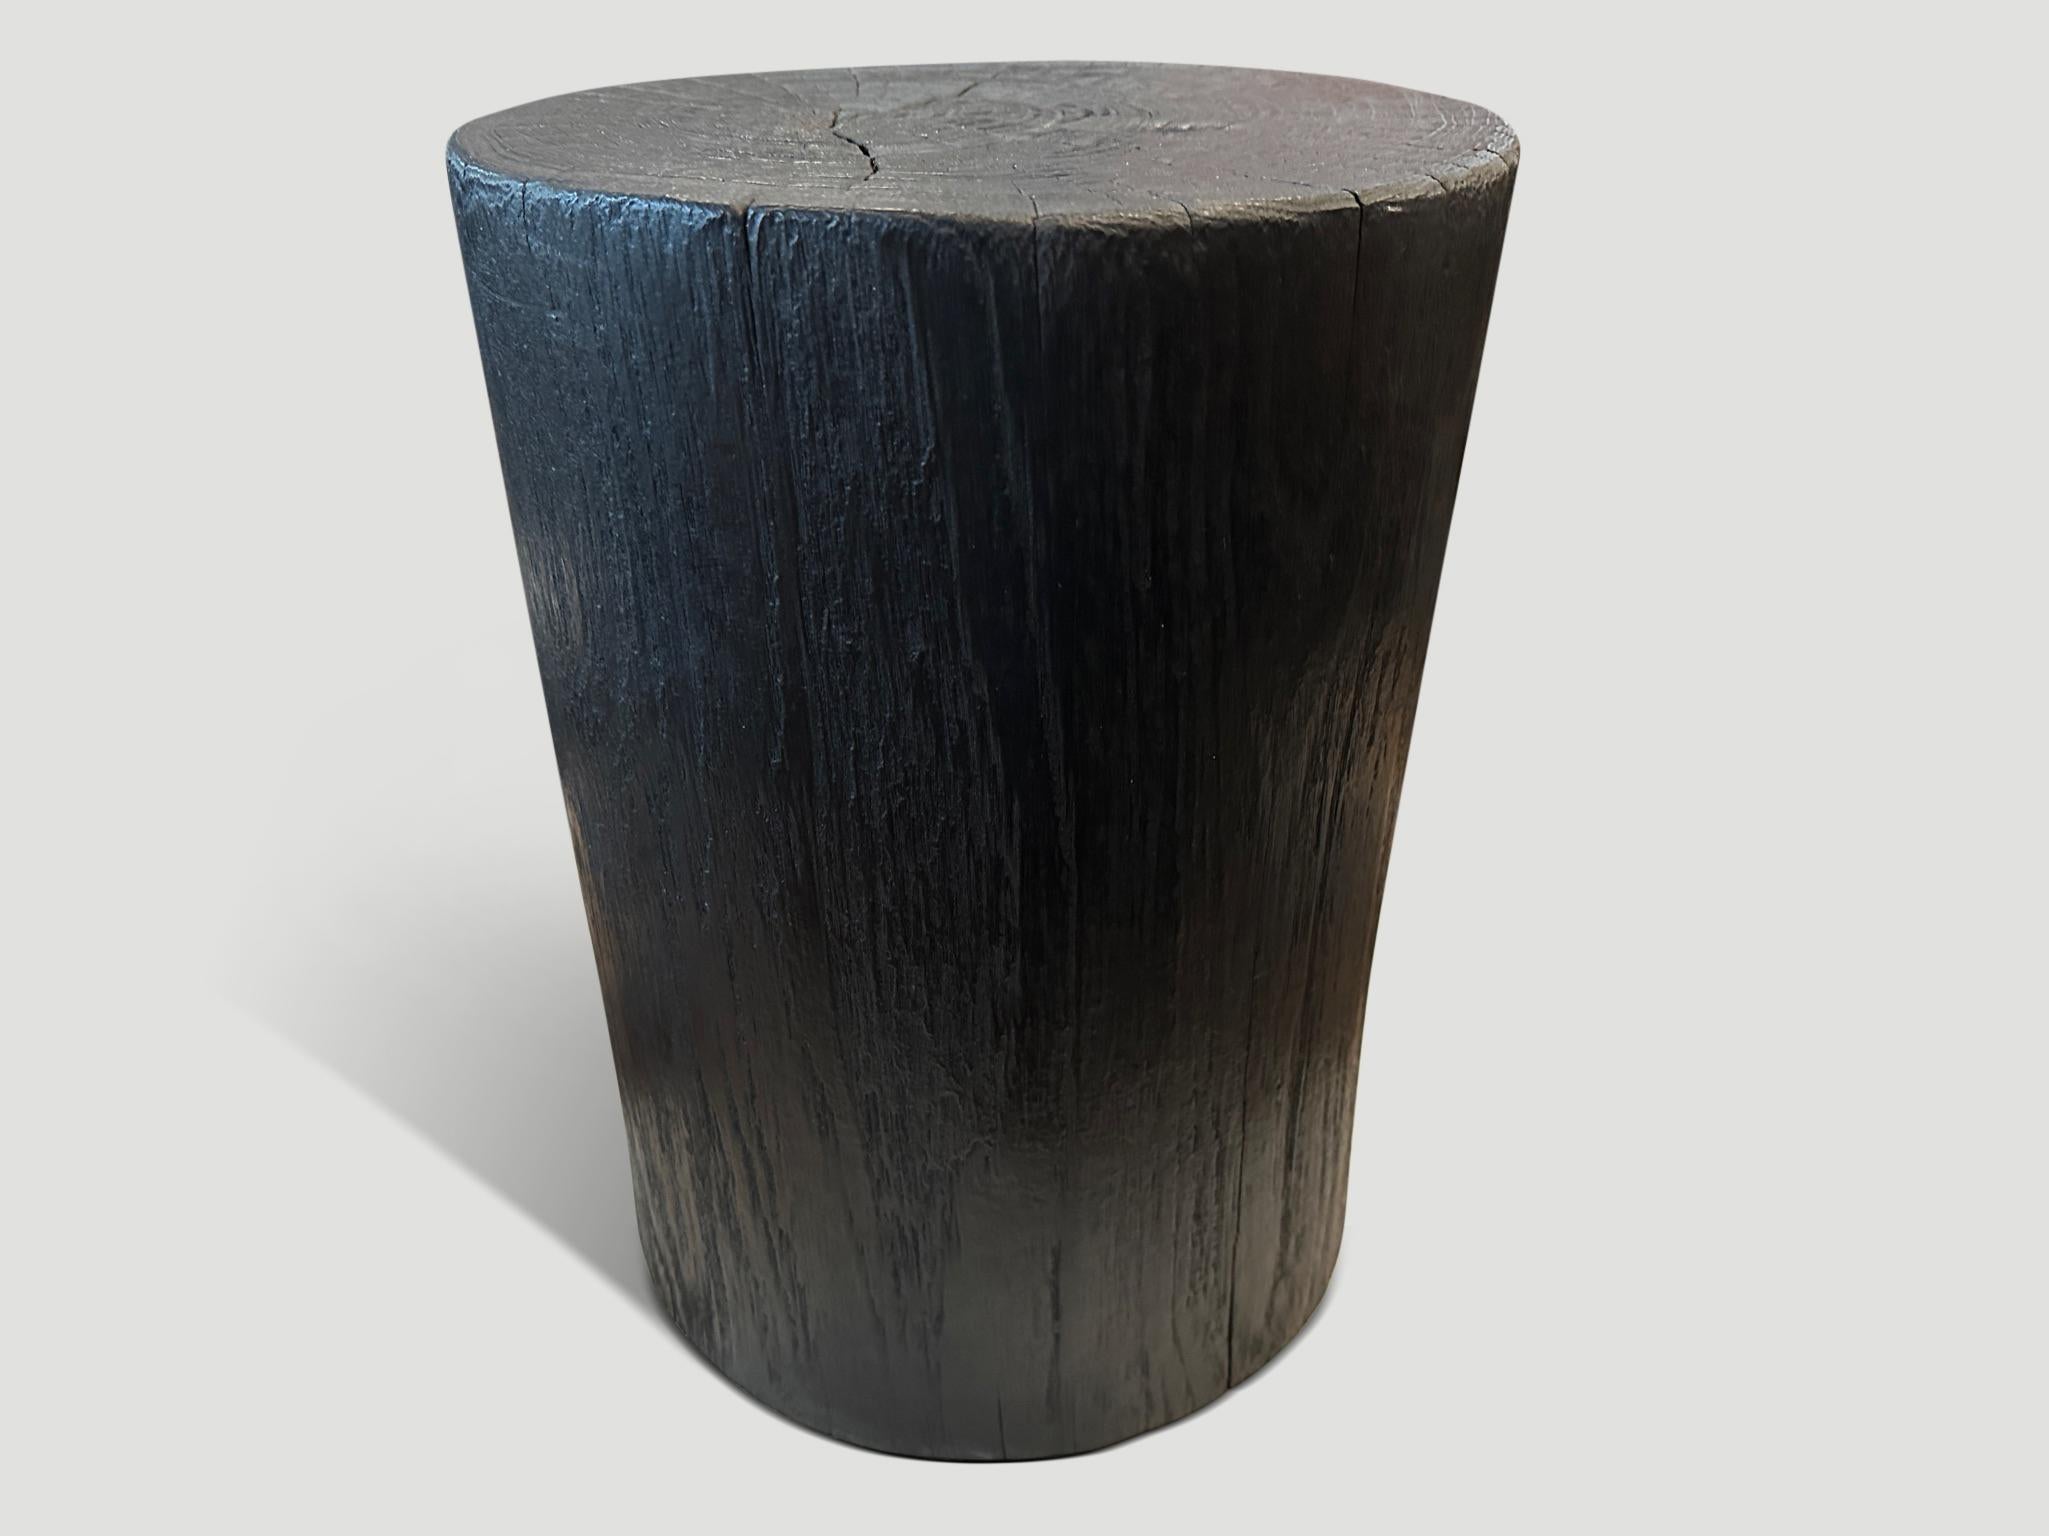 Reclaimed teak wood cylinder side table or stool. Charred sanded and sealed and carved into a minimalist cylinder whilst respecting the natural organic wood. We have a collection. The price and images reflect the one shown. Also available bleached.